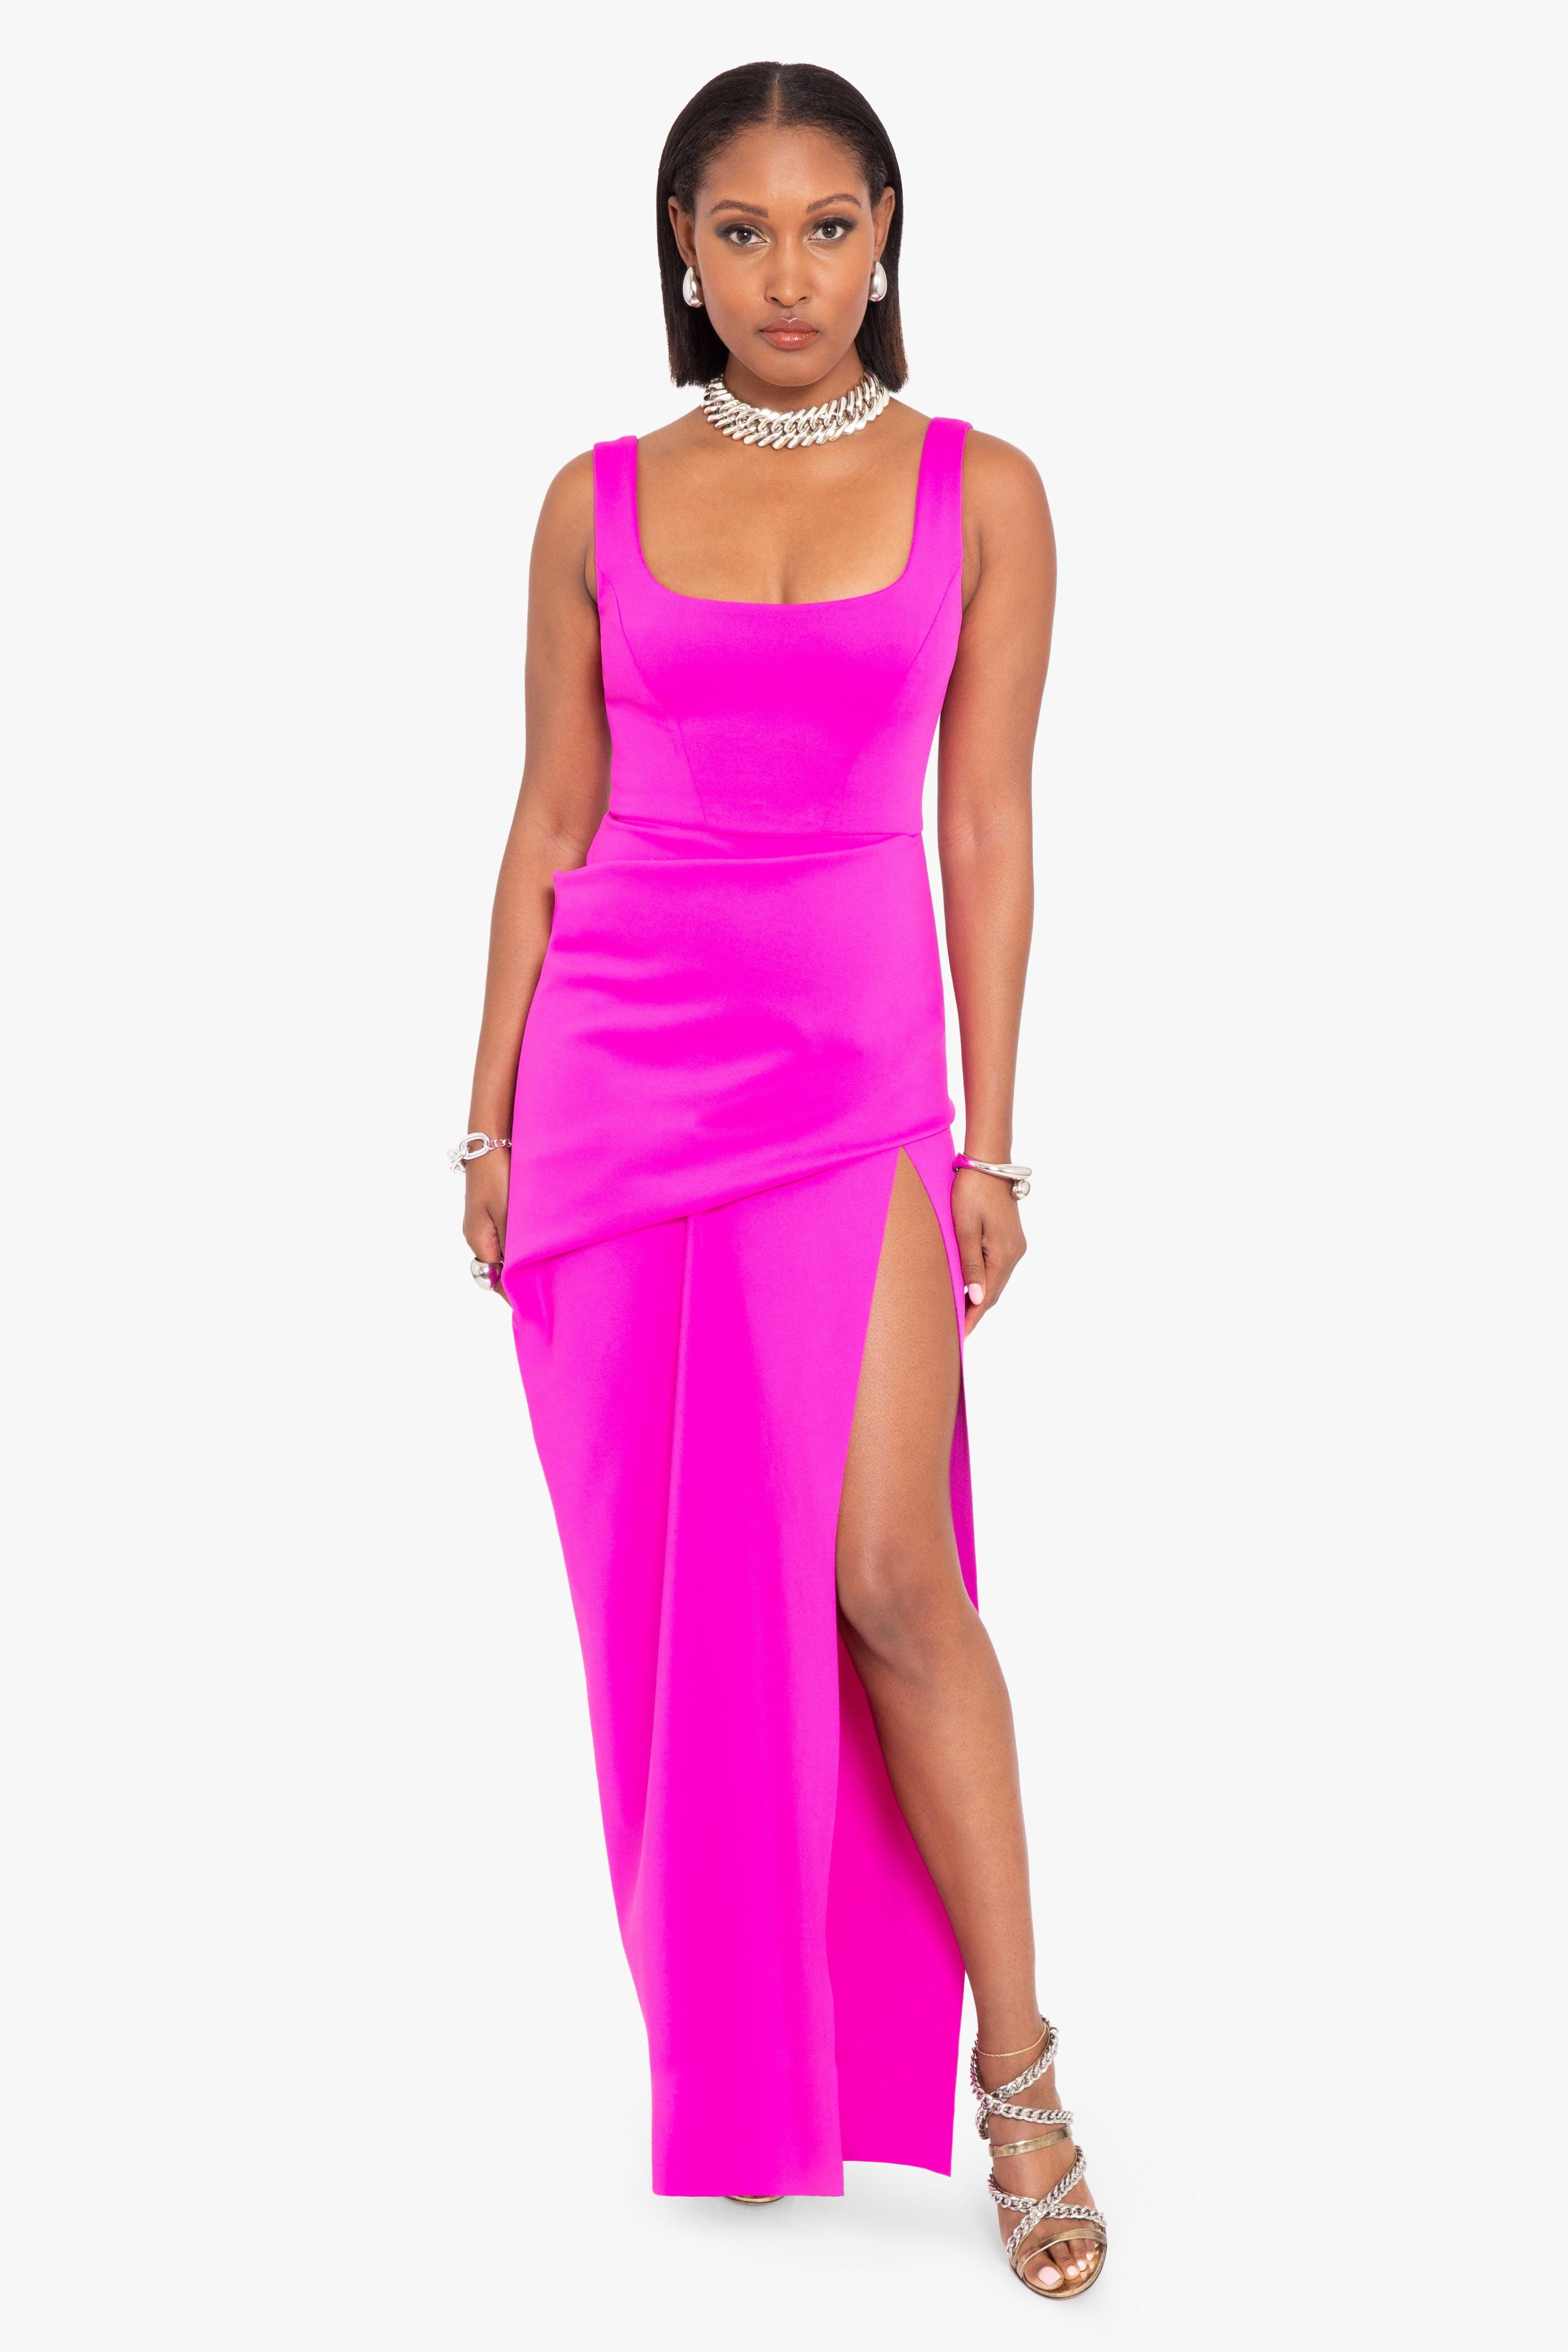 Black Halo Katia Gown in Pink